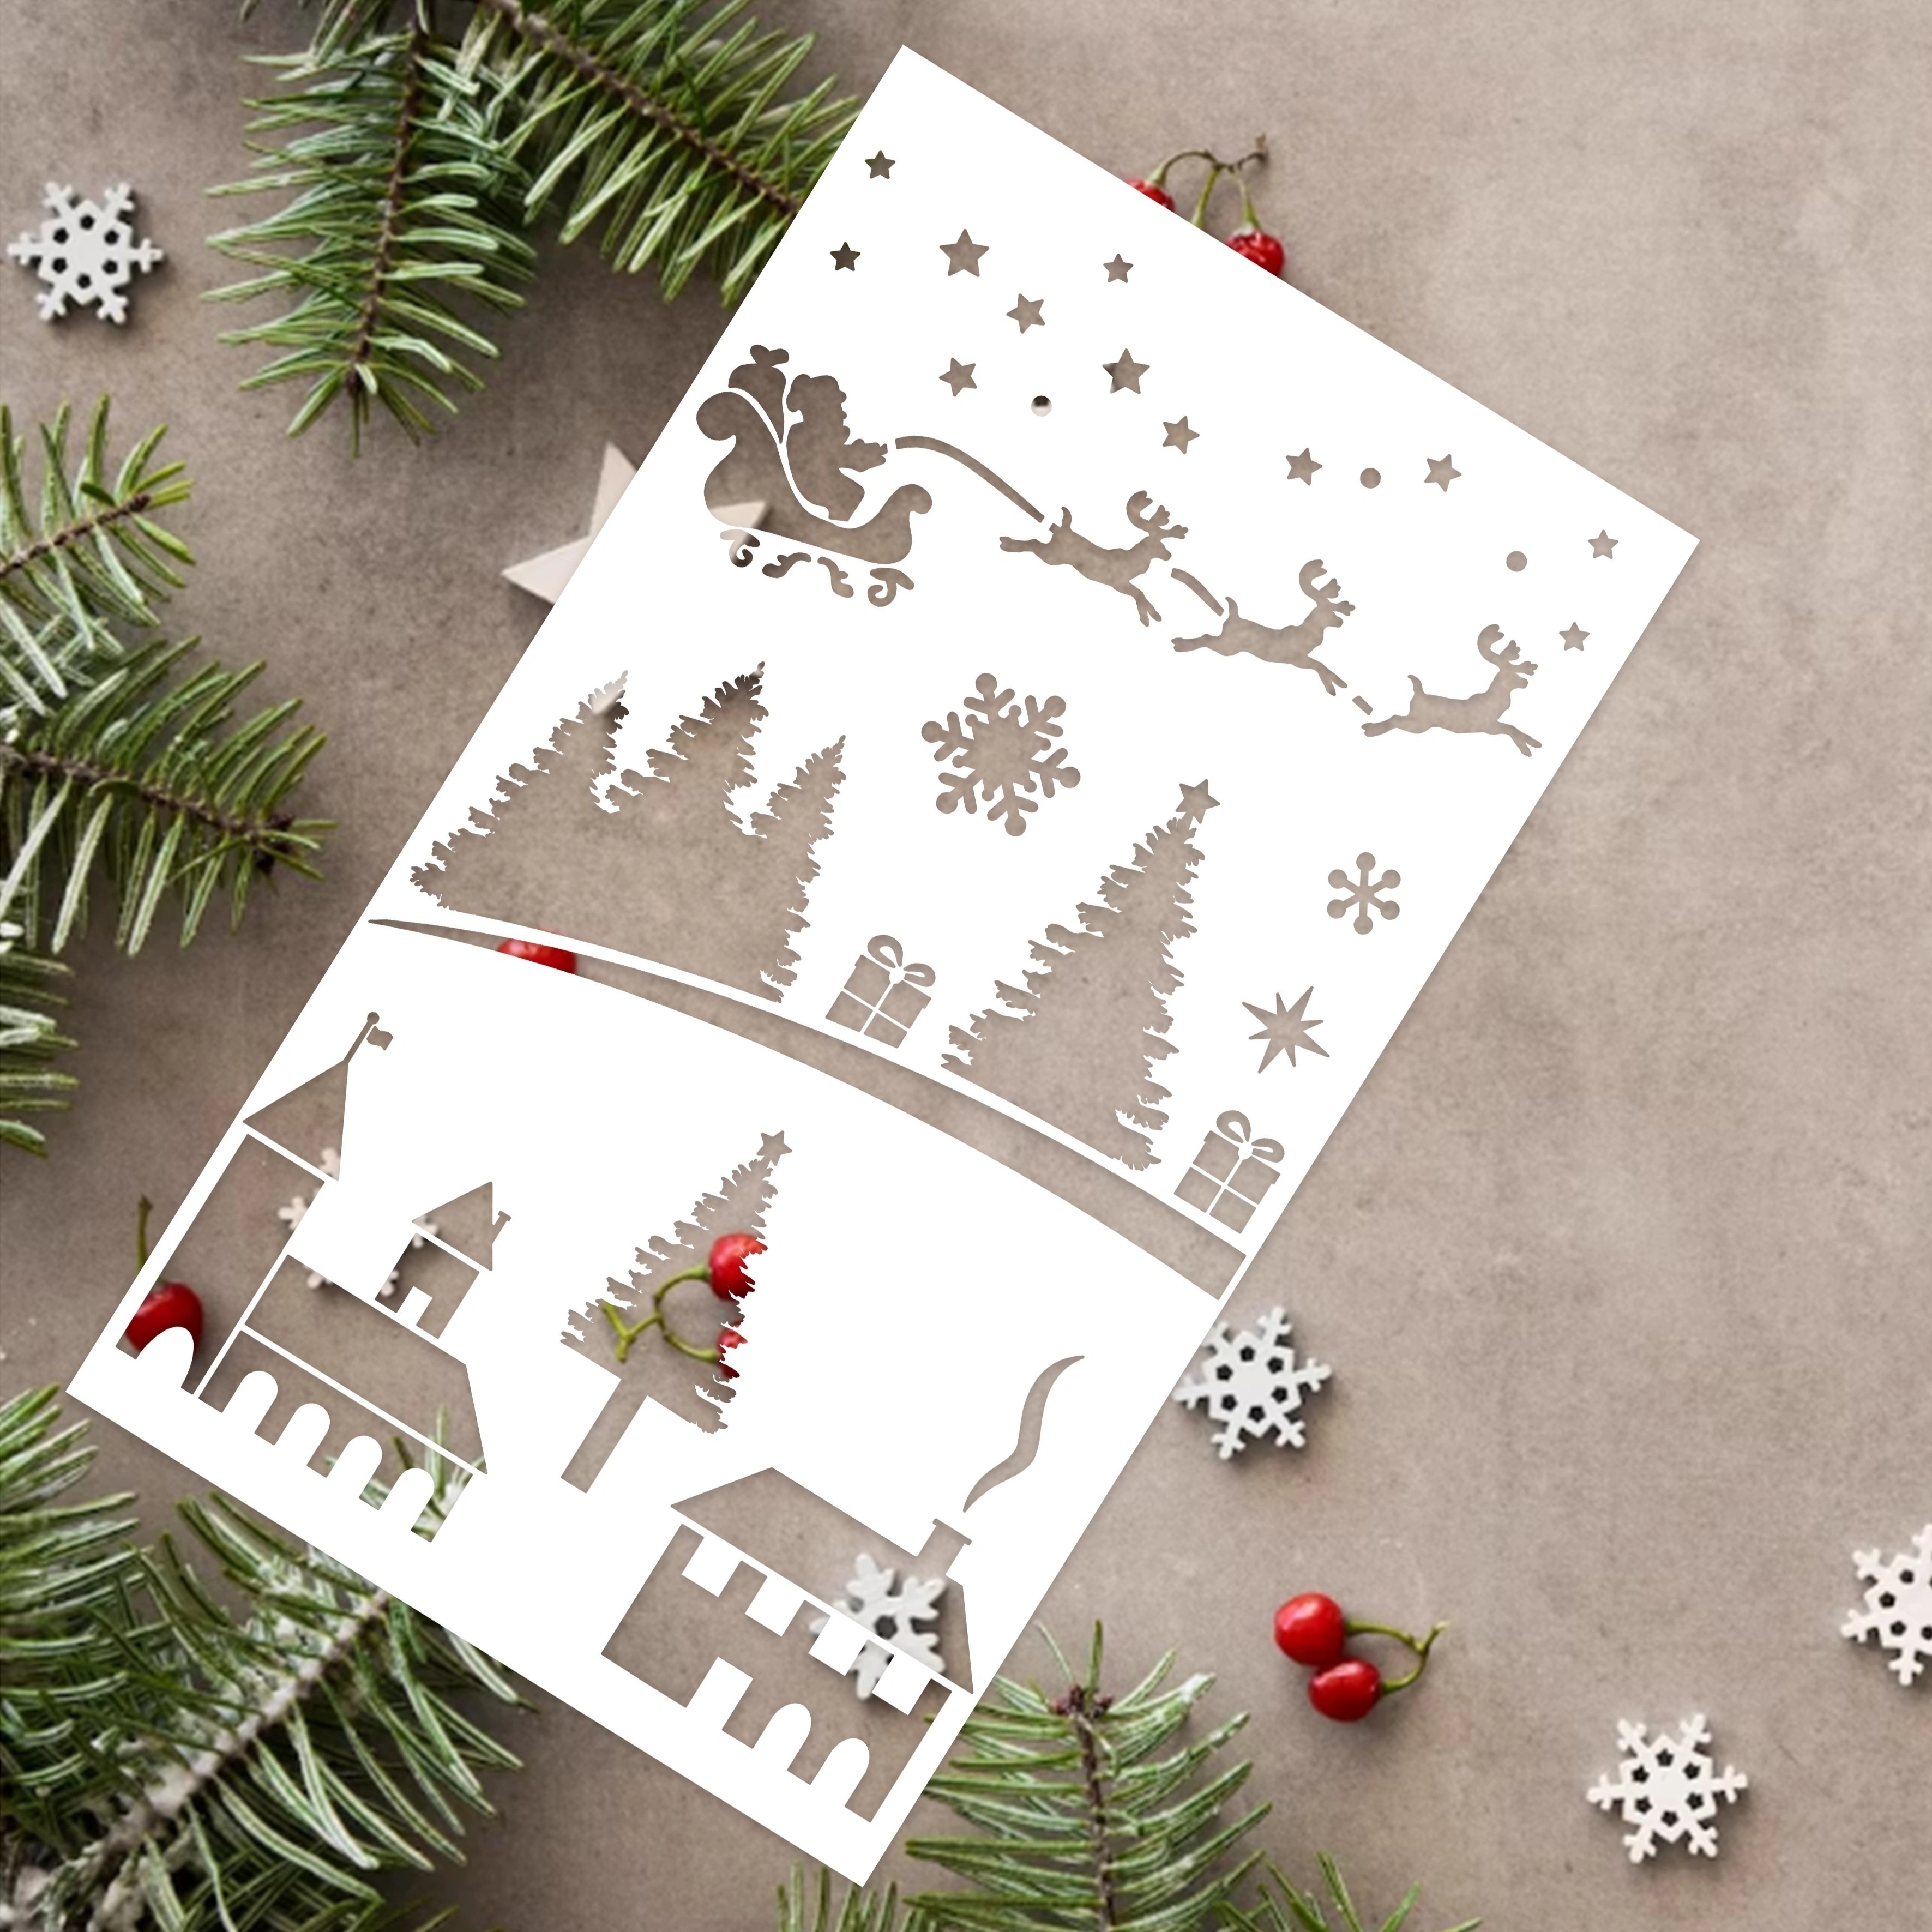 64pcs Small Christmas Stencils, 3x3 inch Reusable Craft Stencil for Painting on Wood, Fabric, Paper, Windows, DIY Christmas Ornaments, Cards